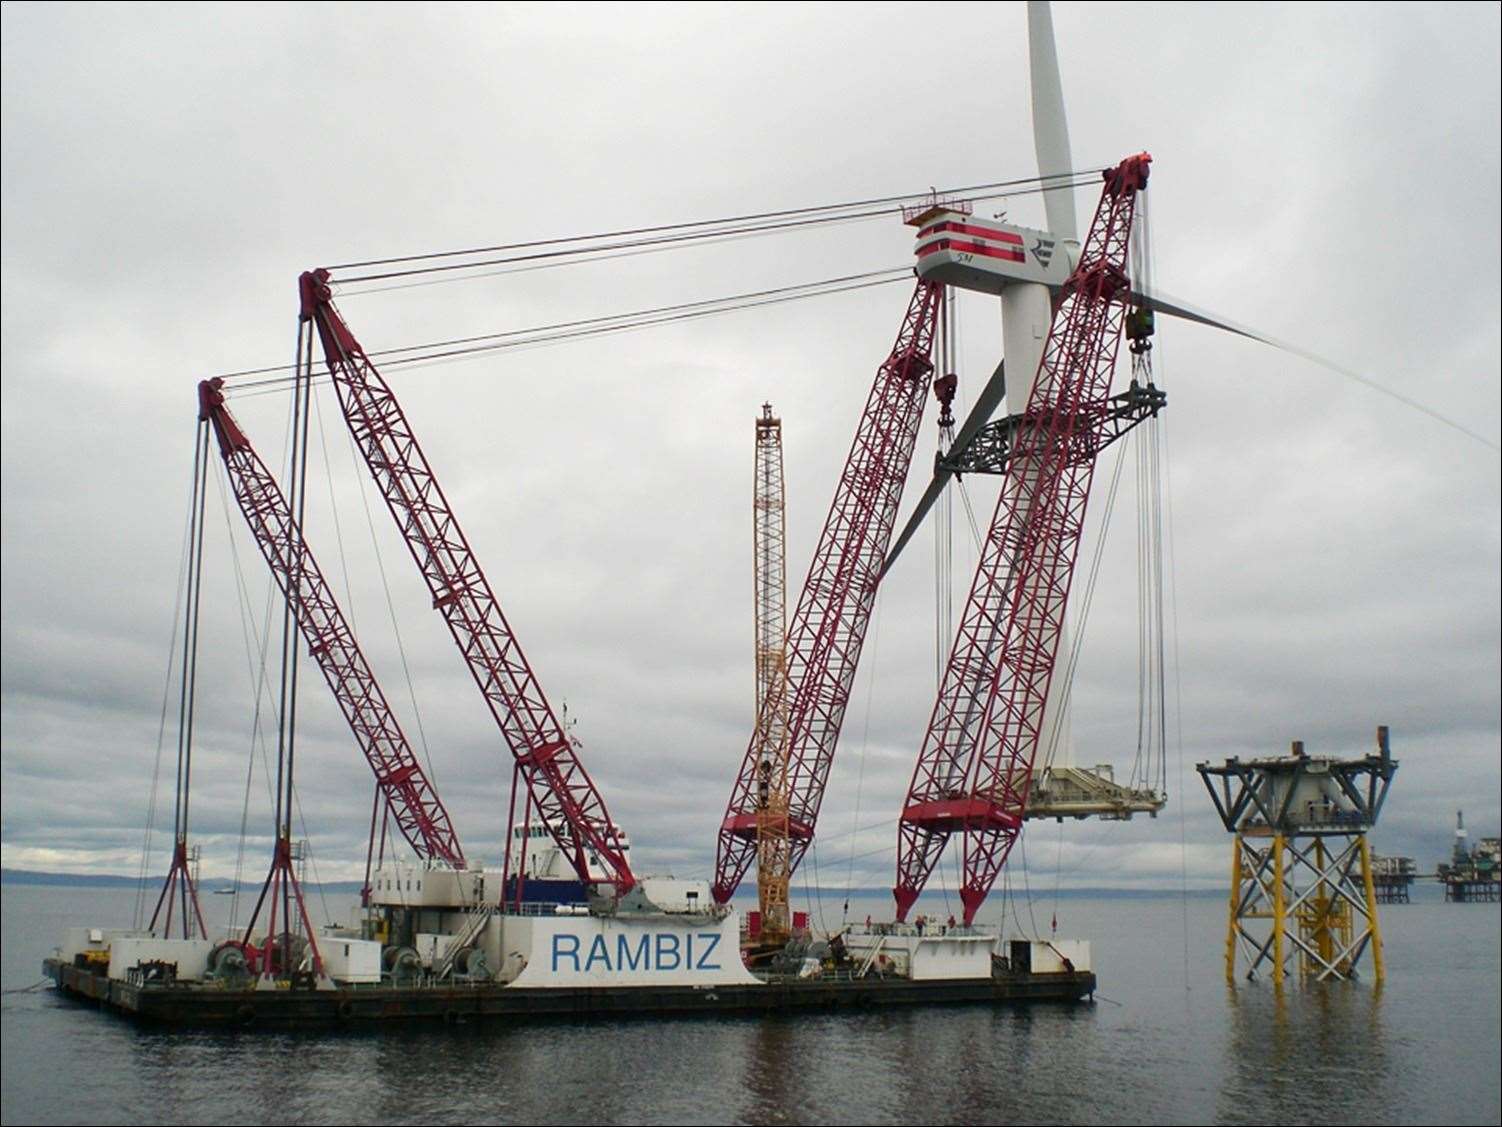 Offshore turbine being lifted into place at Beatrice offshore wind farm during construction.